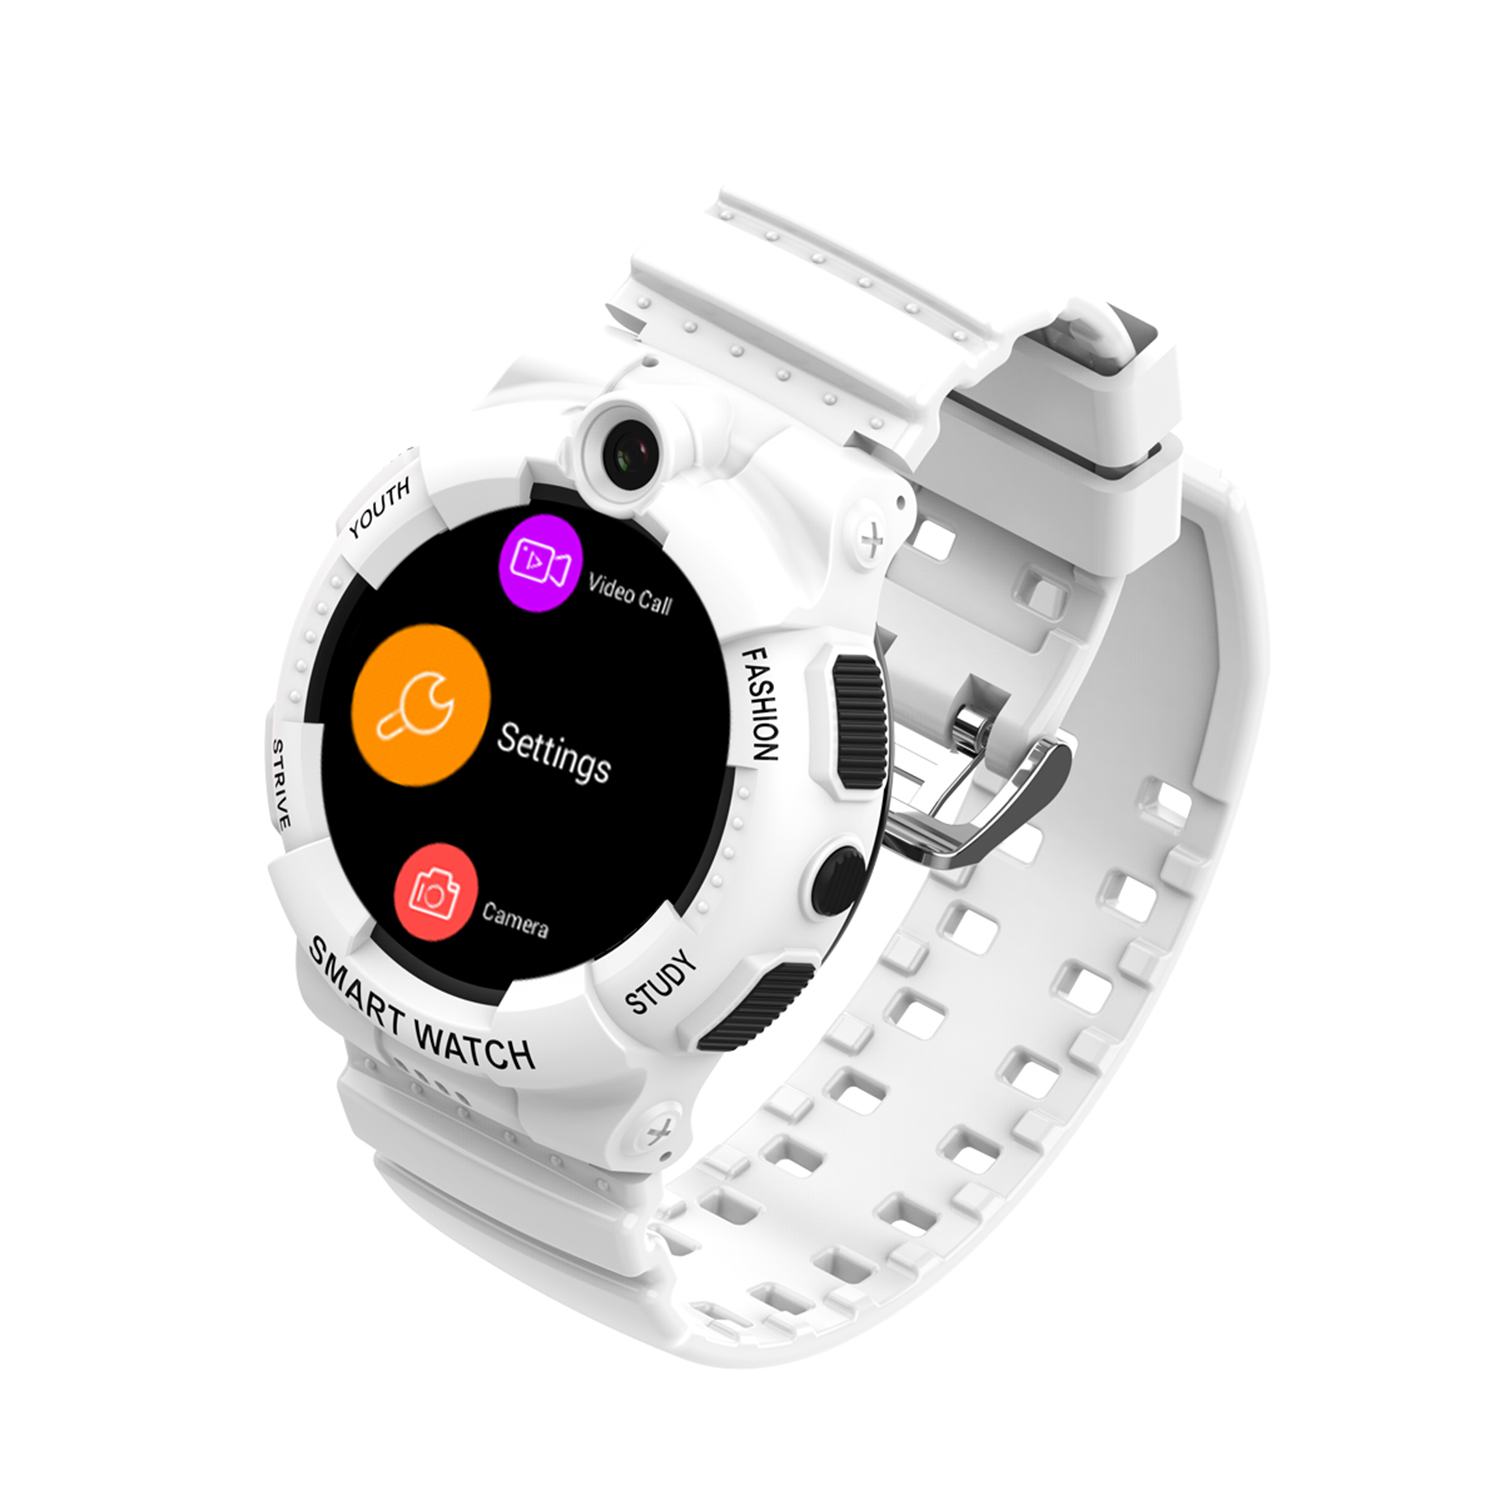 4G IP67 Waterproof Accurate Location Smart Safety GPS Tracker Watch for Kids with Real-Time Global Free video Call D48P